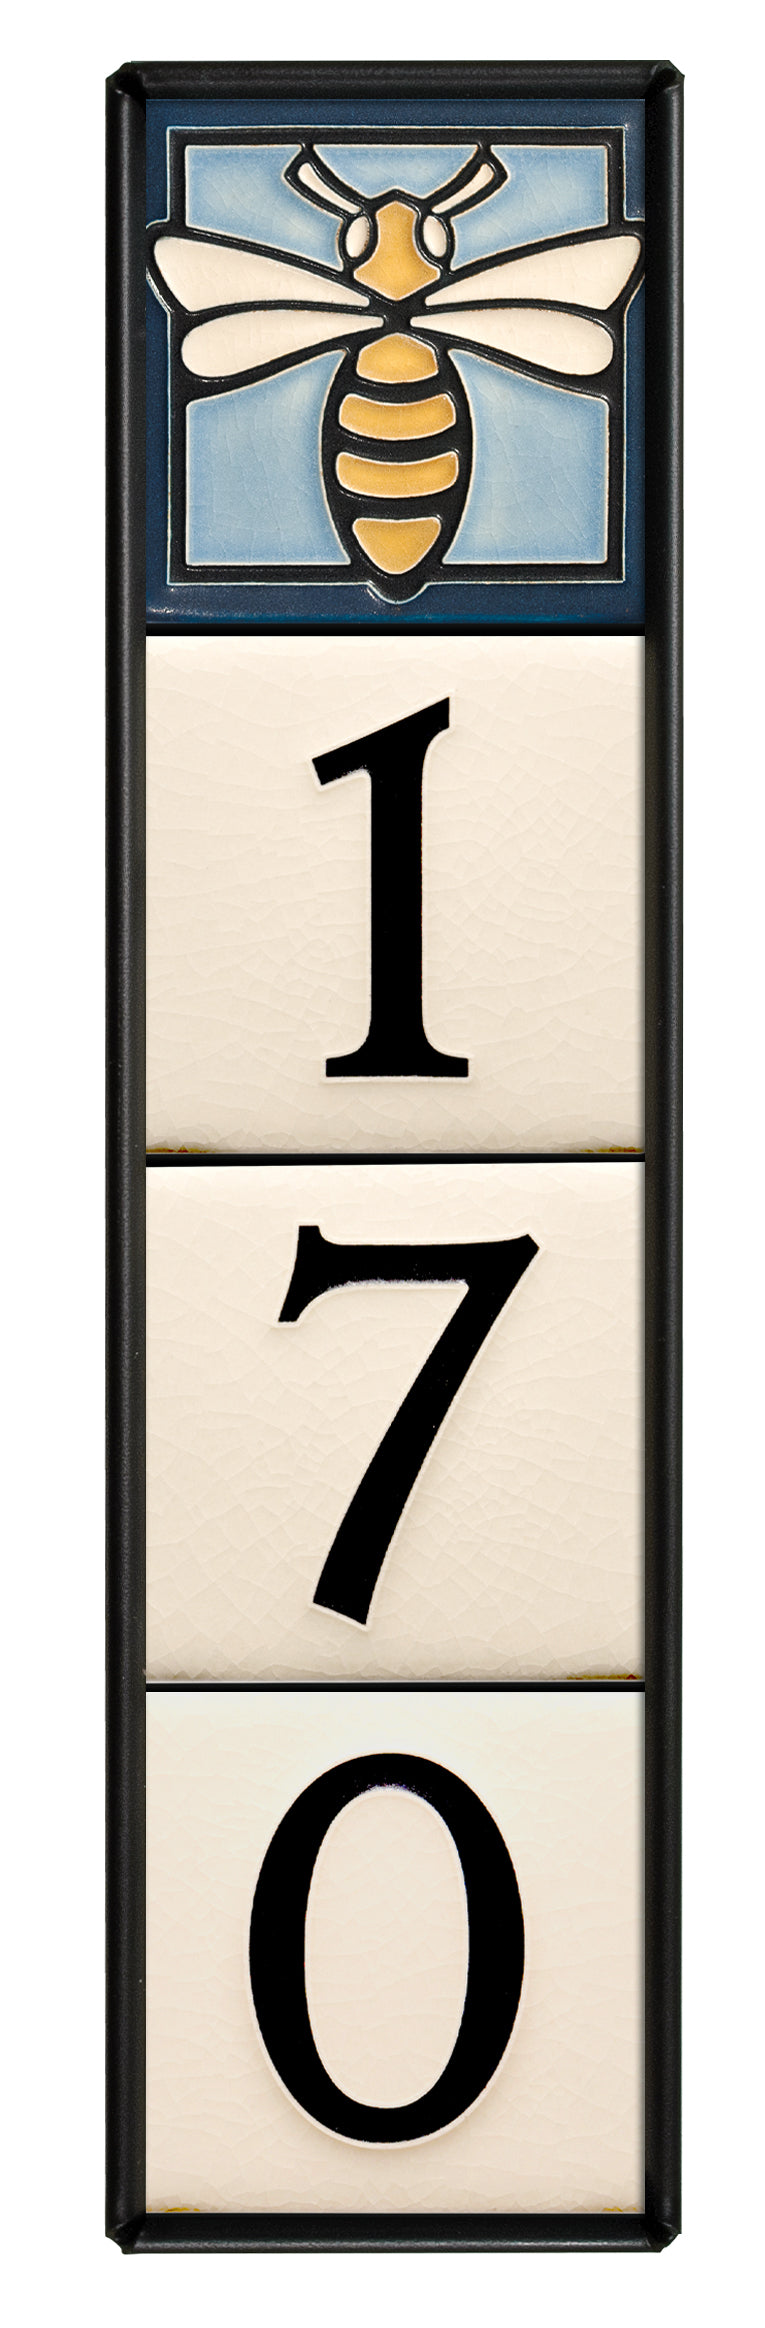 4x4 House Number Frame (Holds Four Tiles)